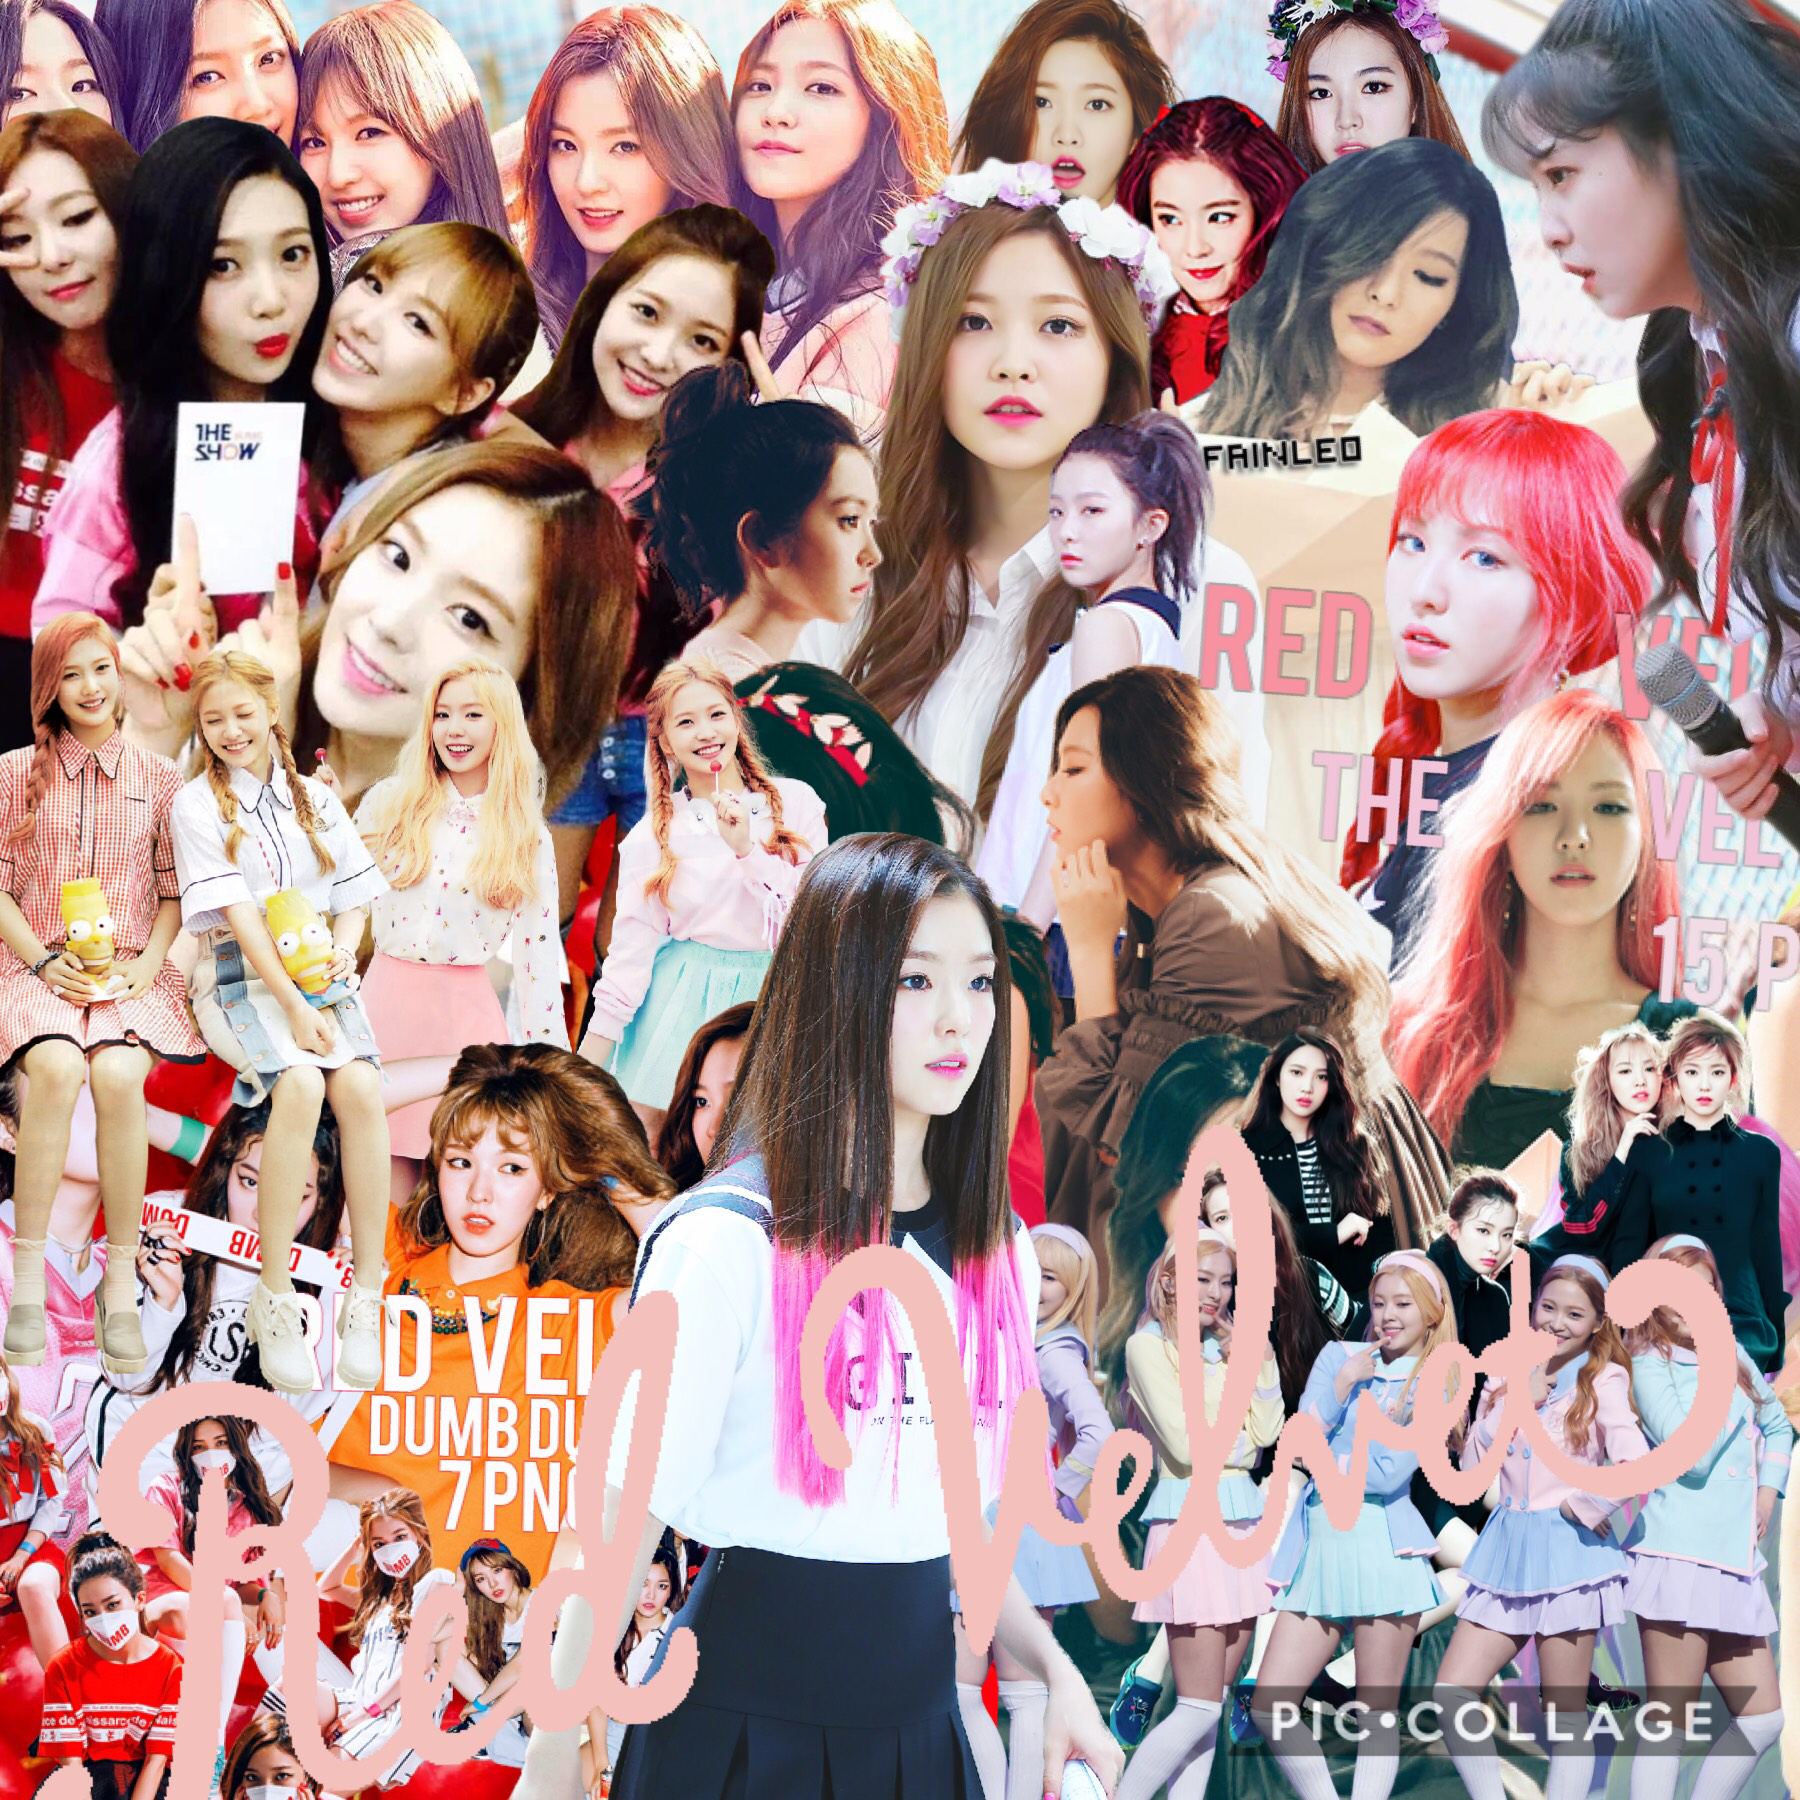 A red velvet collage~ hope that nothing goes wrong..